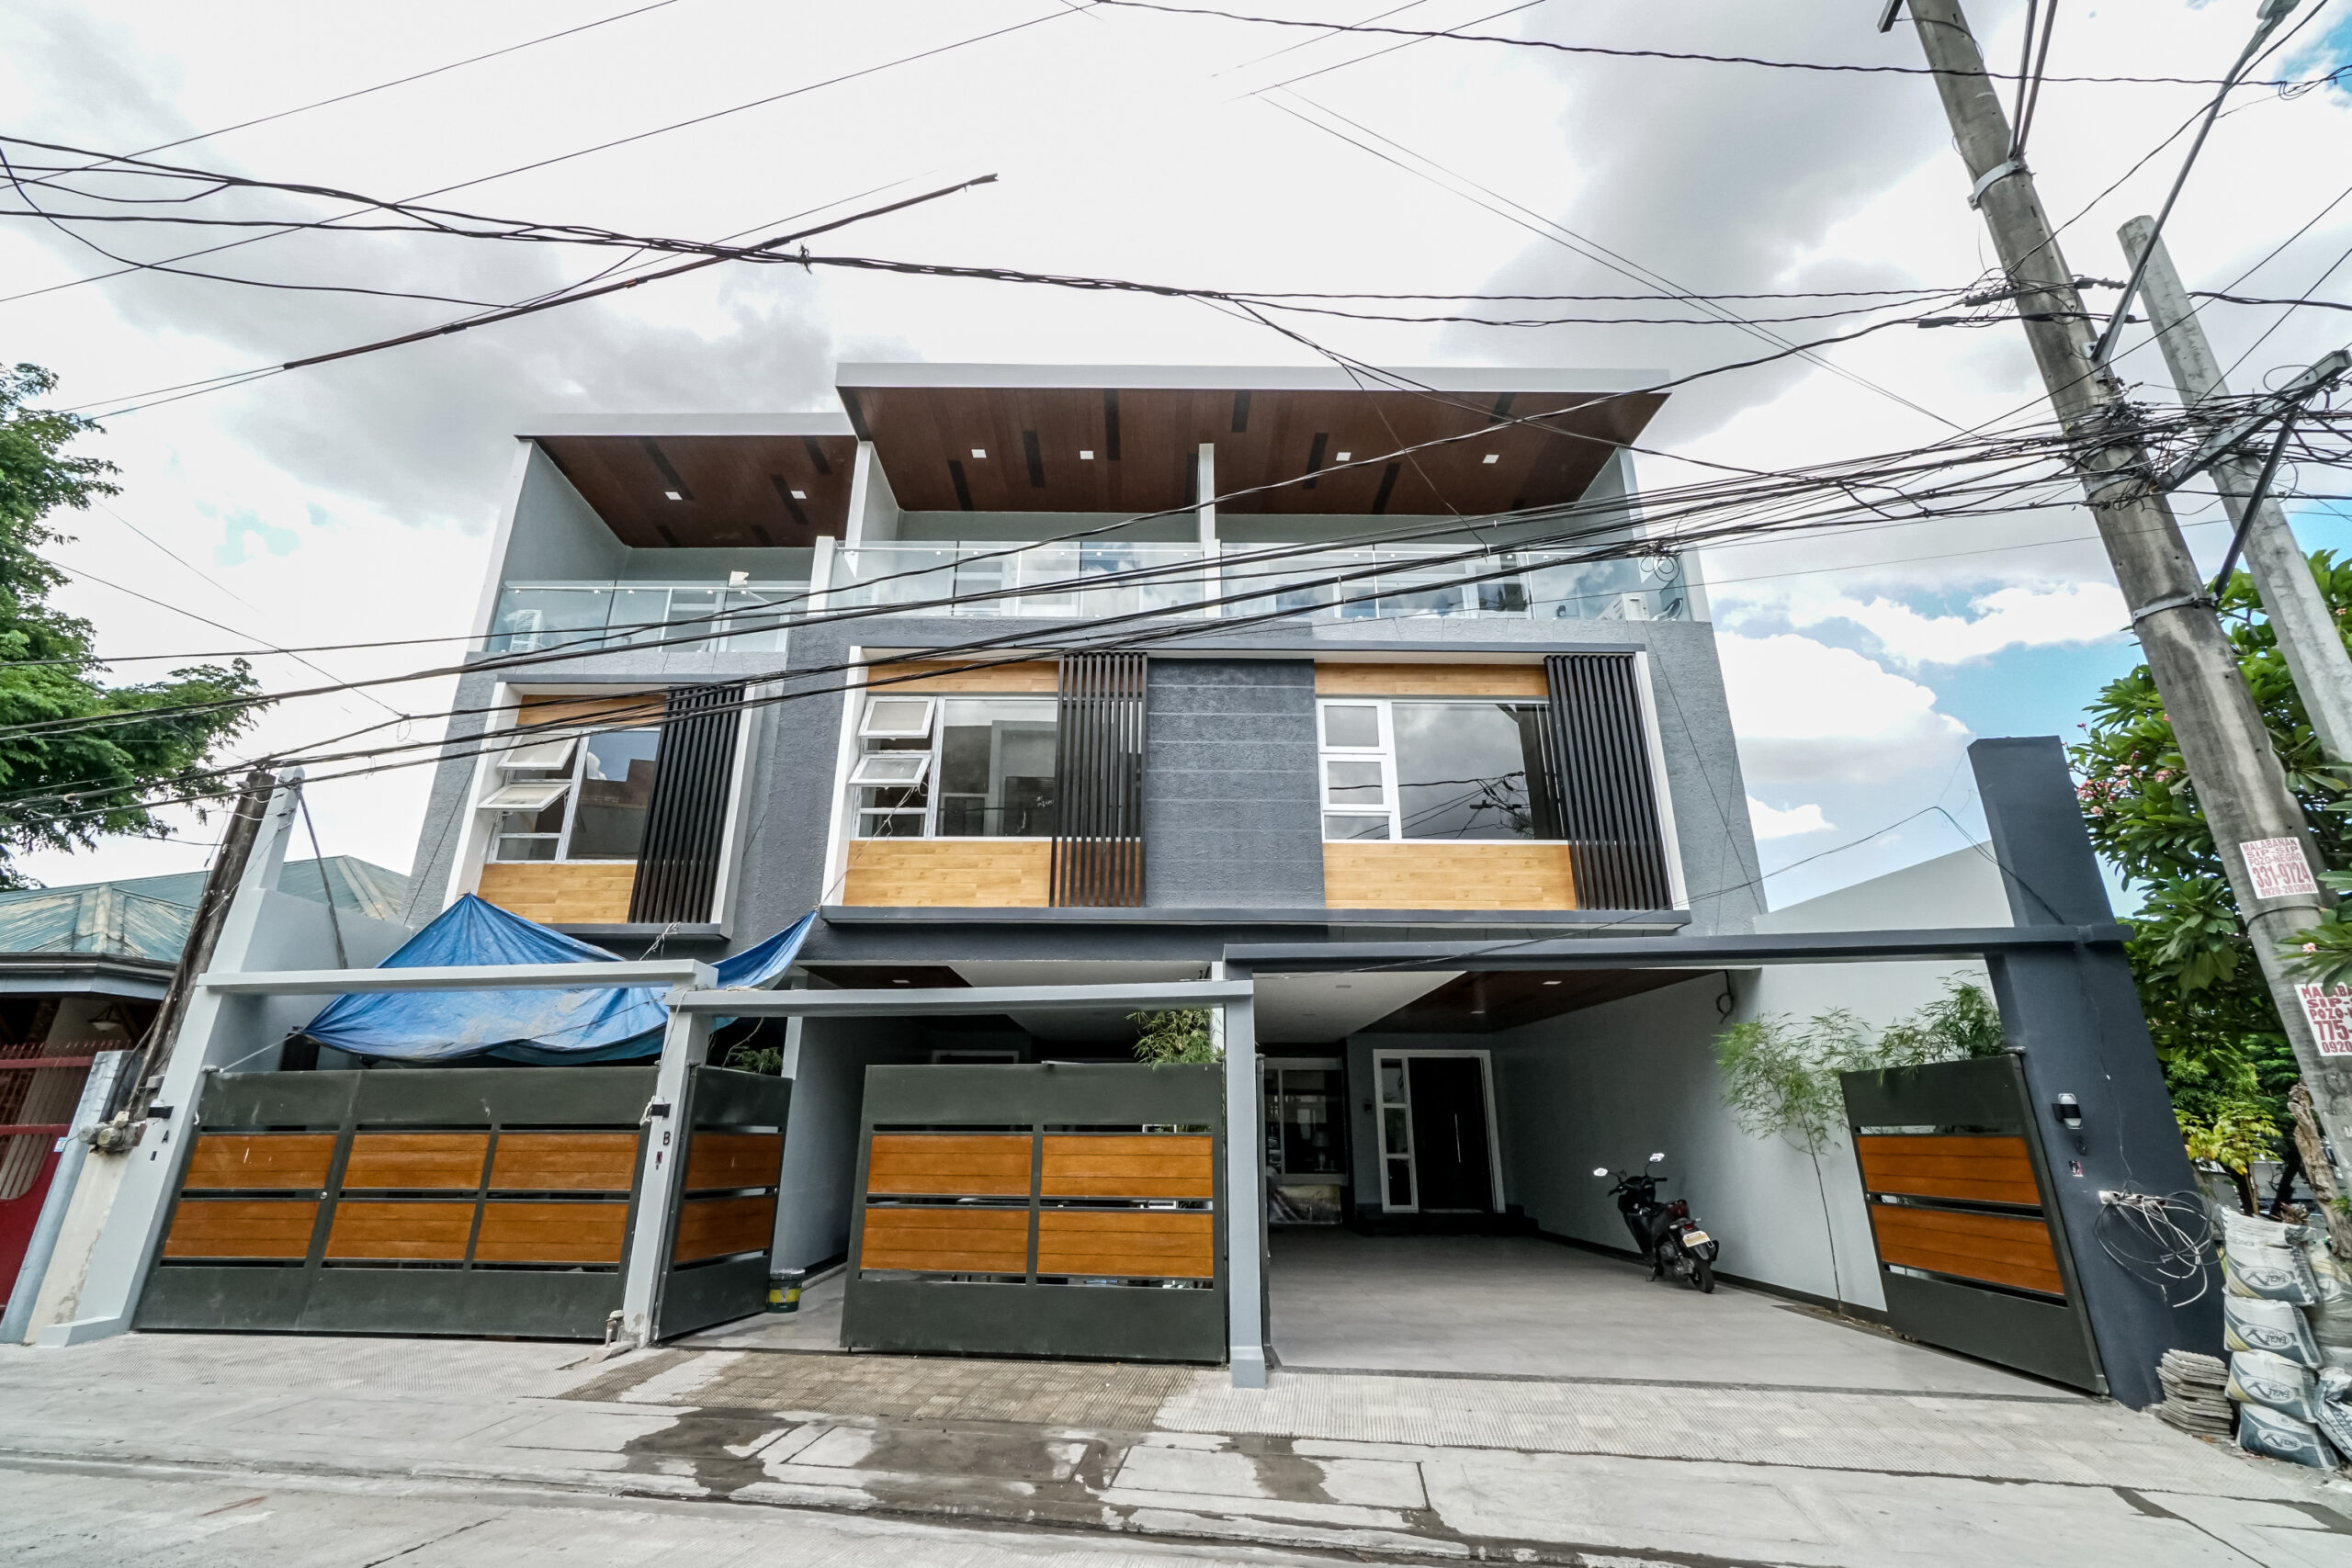 Modern Townhouse in Don Antonio heights South Subdivision, Quezon City